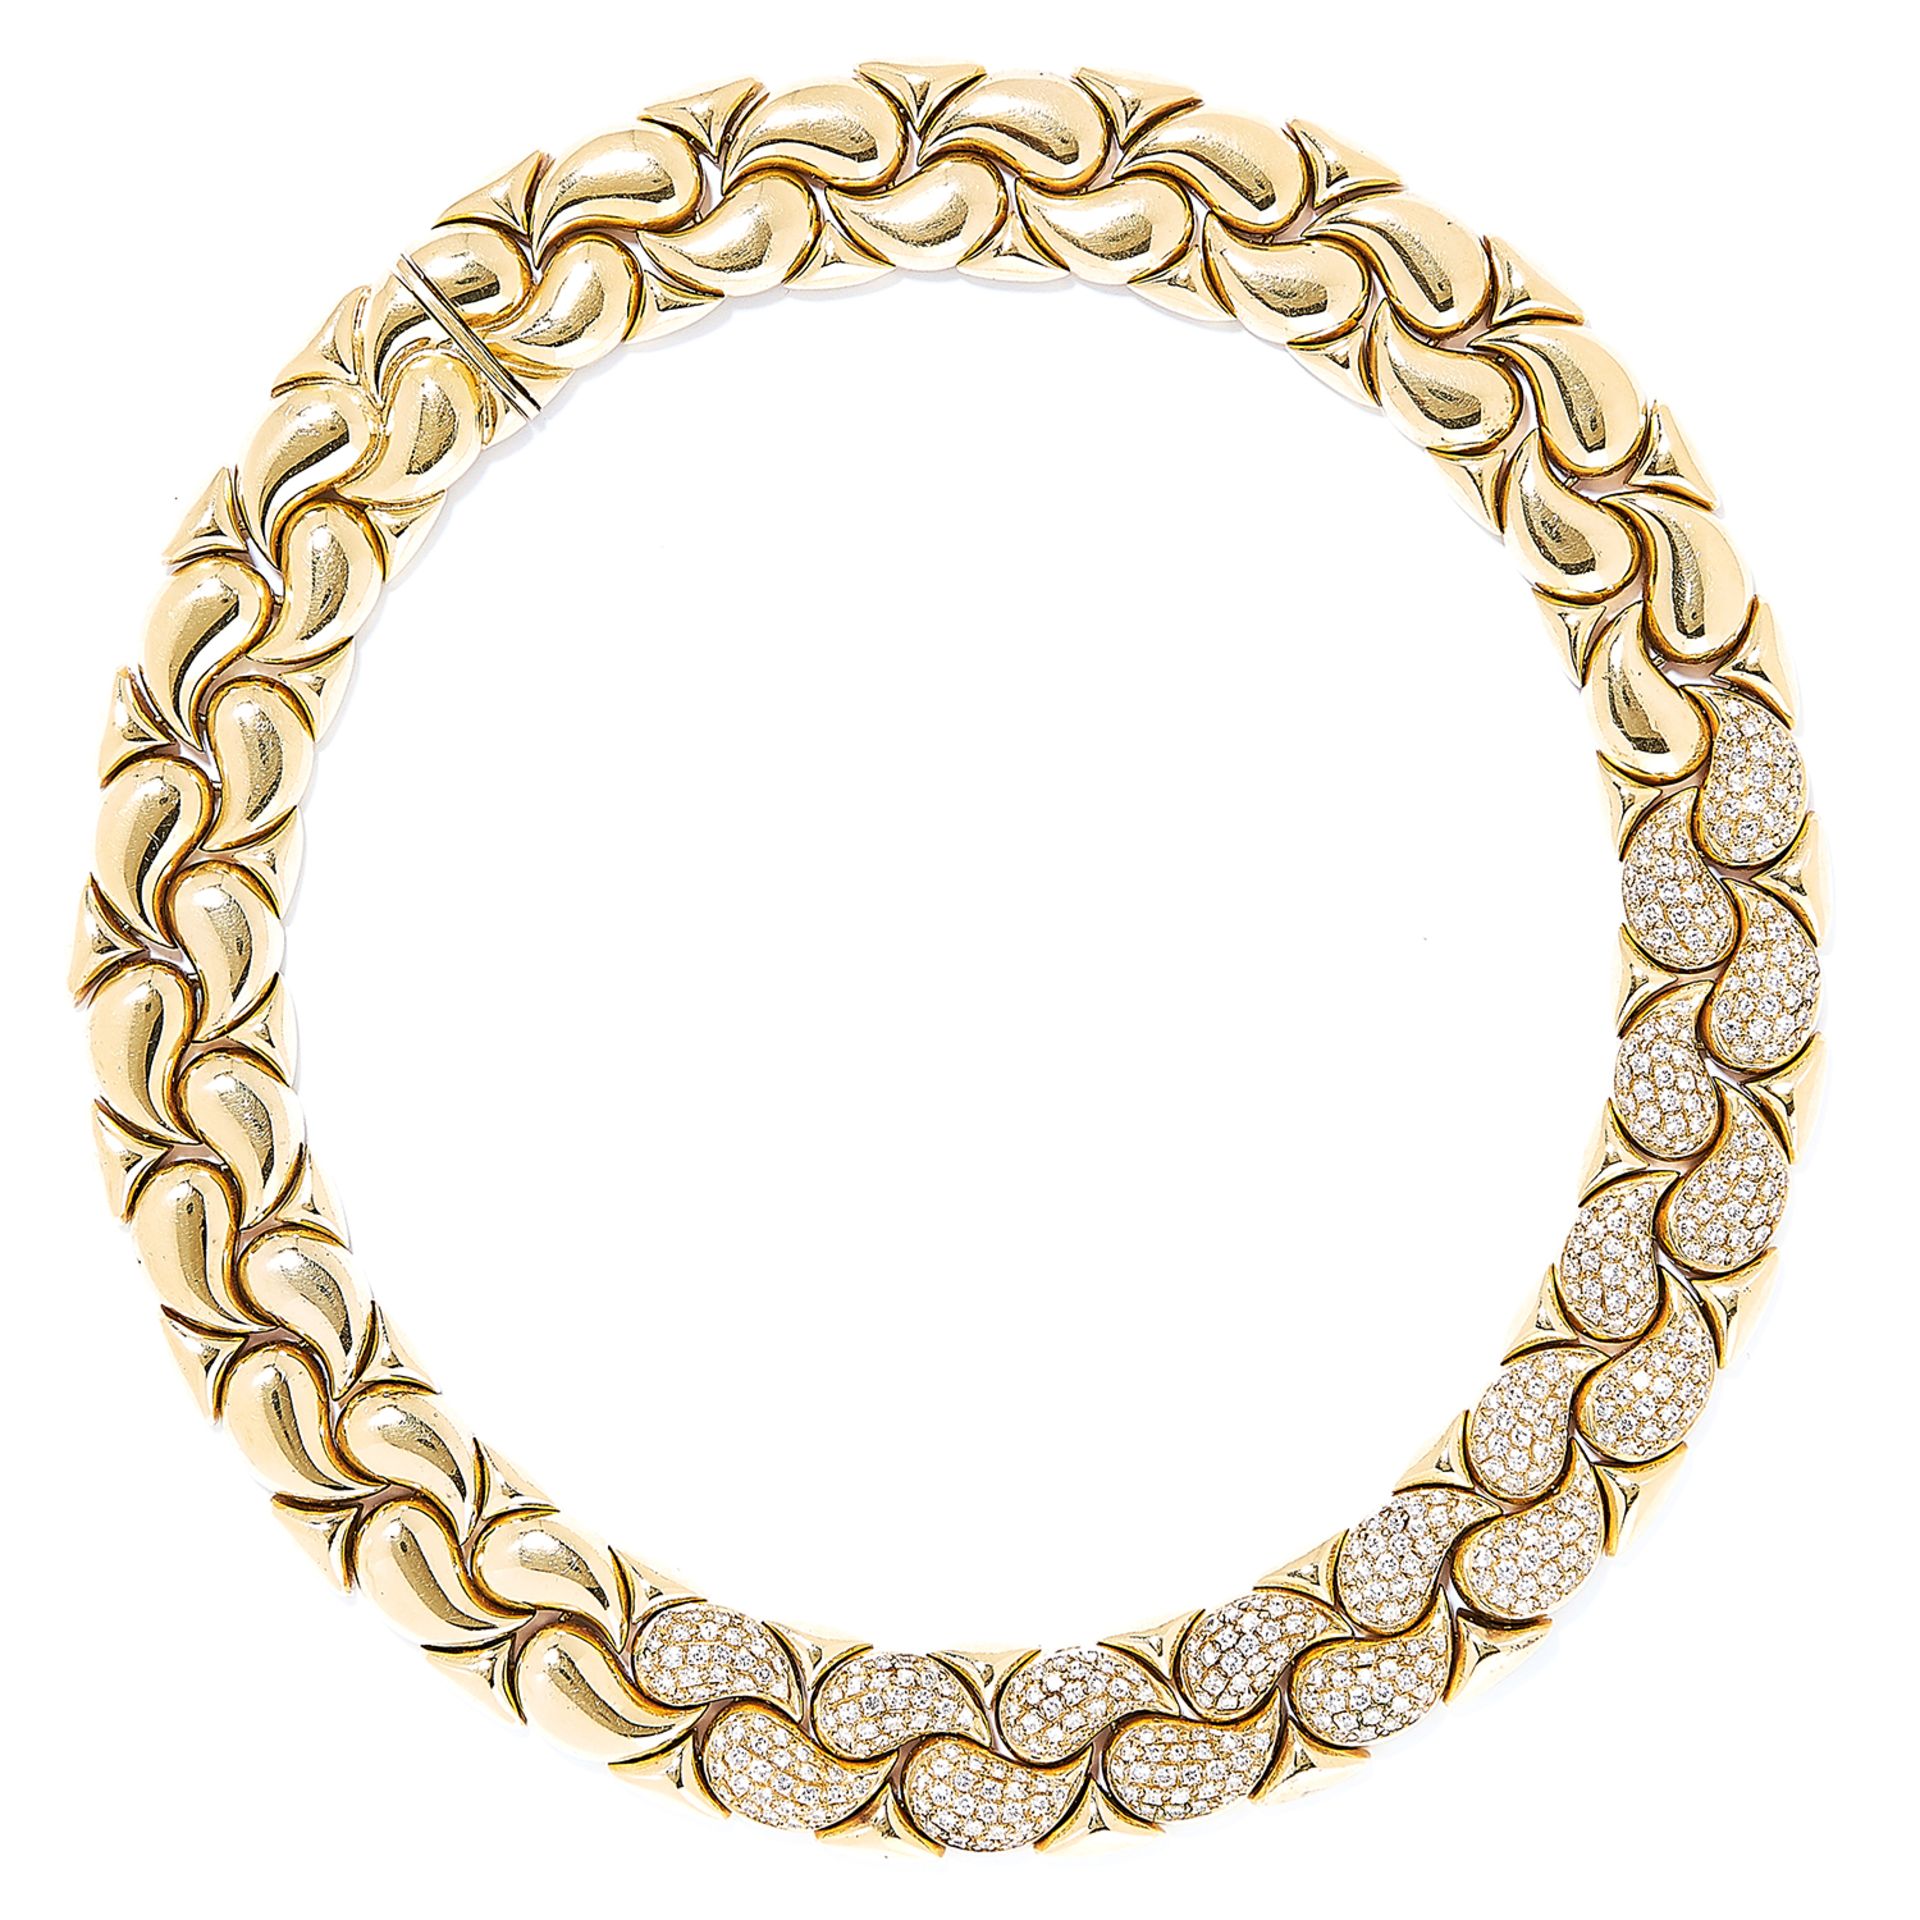 'CASMIR' DIAMOND NECKLACE AND BRACELET SUITE in 18ct yellow gold, in the style of Chopard, each - Image 2 of 4